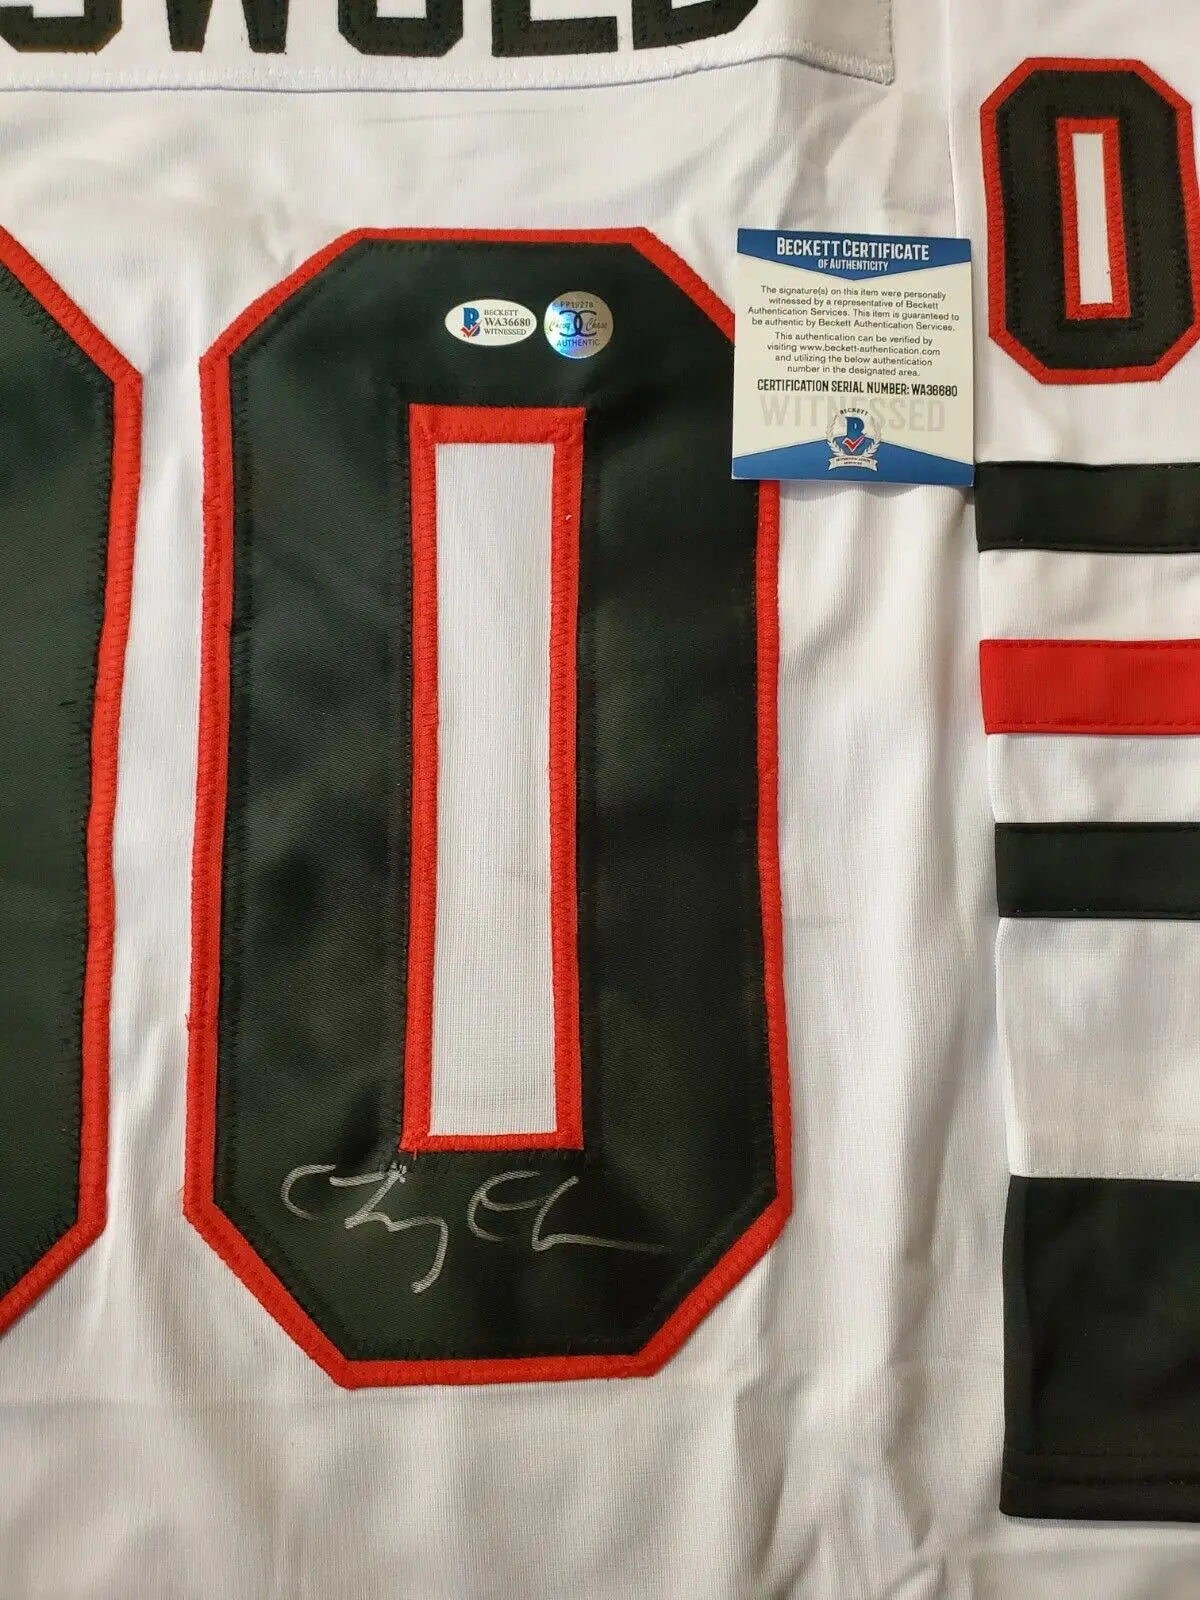 Chevy Chase Signed National Lampoon's Christmas Vacation Jersey